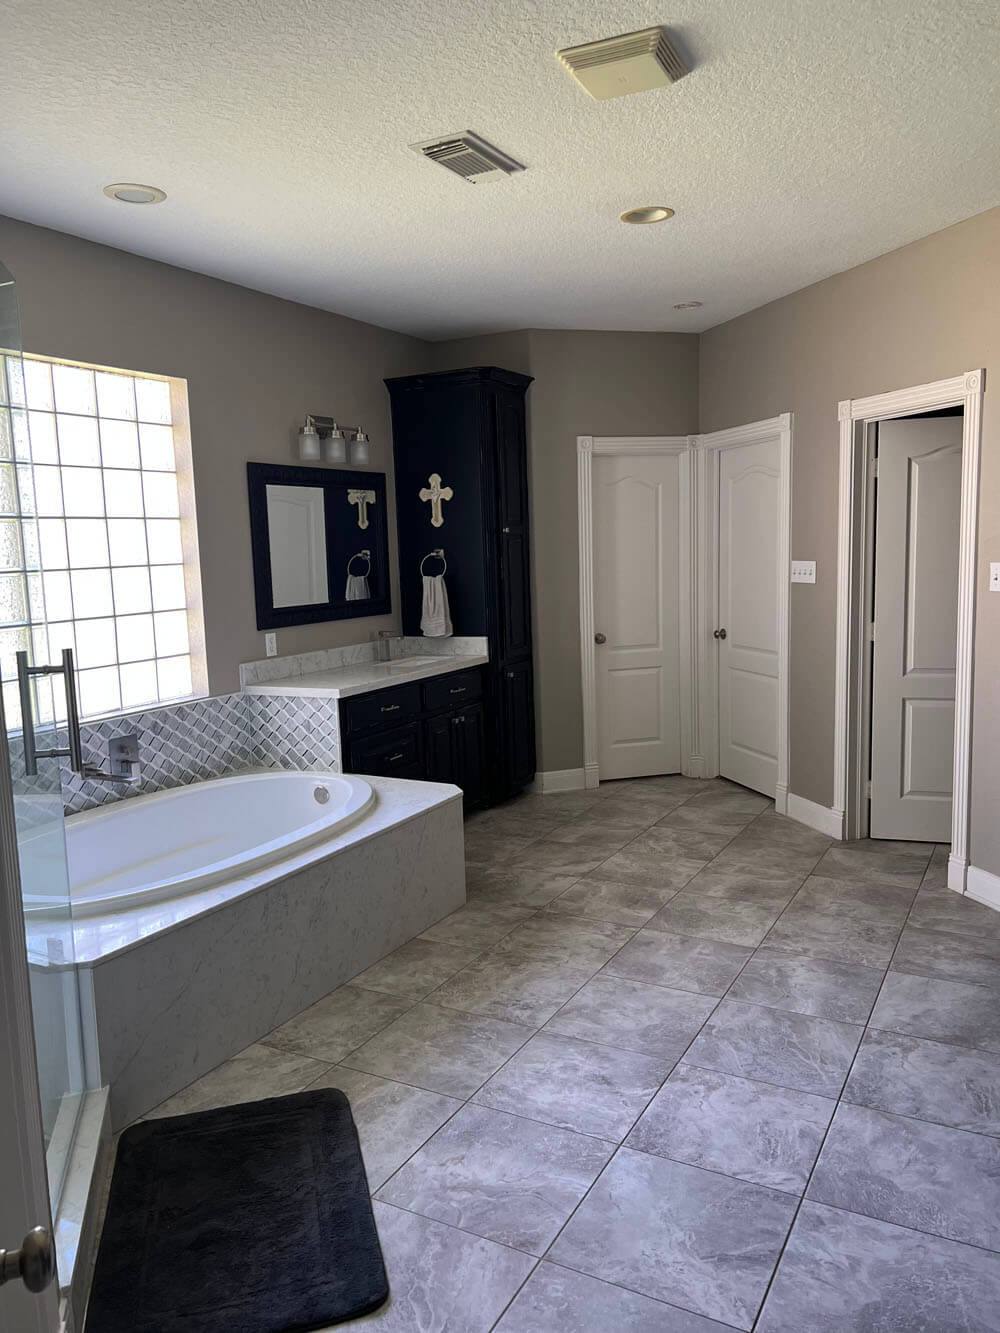 Reliable General Contractor For Residential Or Commercial Bathroom Renovations | Mr. Drywall Repairs and Remodeling